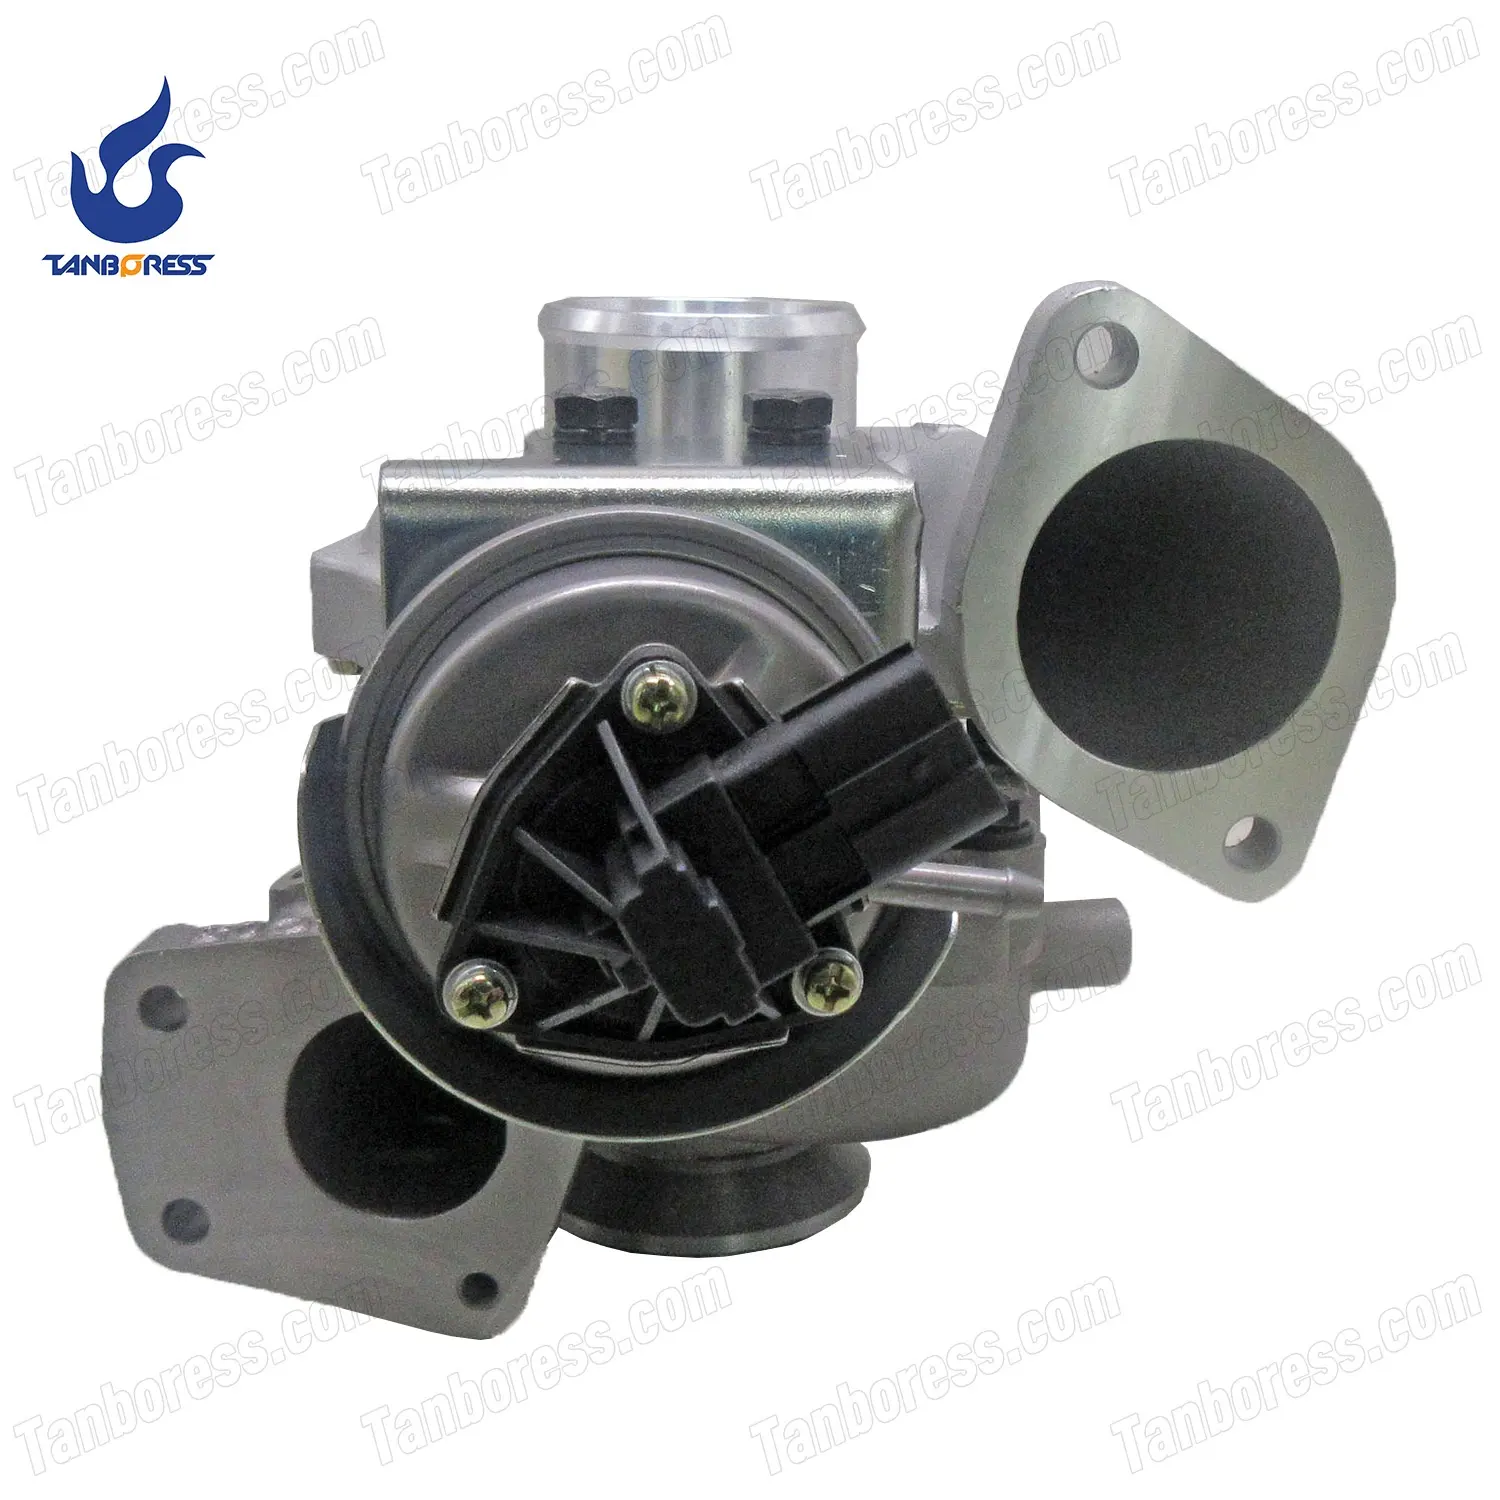 Popular sale TD04L steel turbocharger Z20D1 engine parts turbo for Opel/Chevrolet 49477-01510 25187703 supercharged